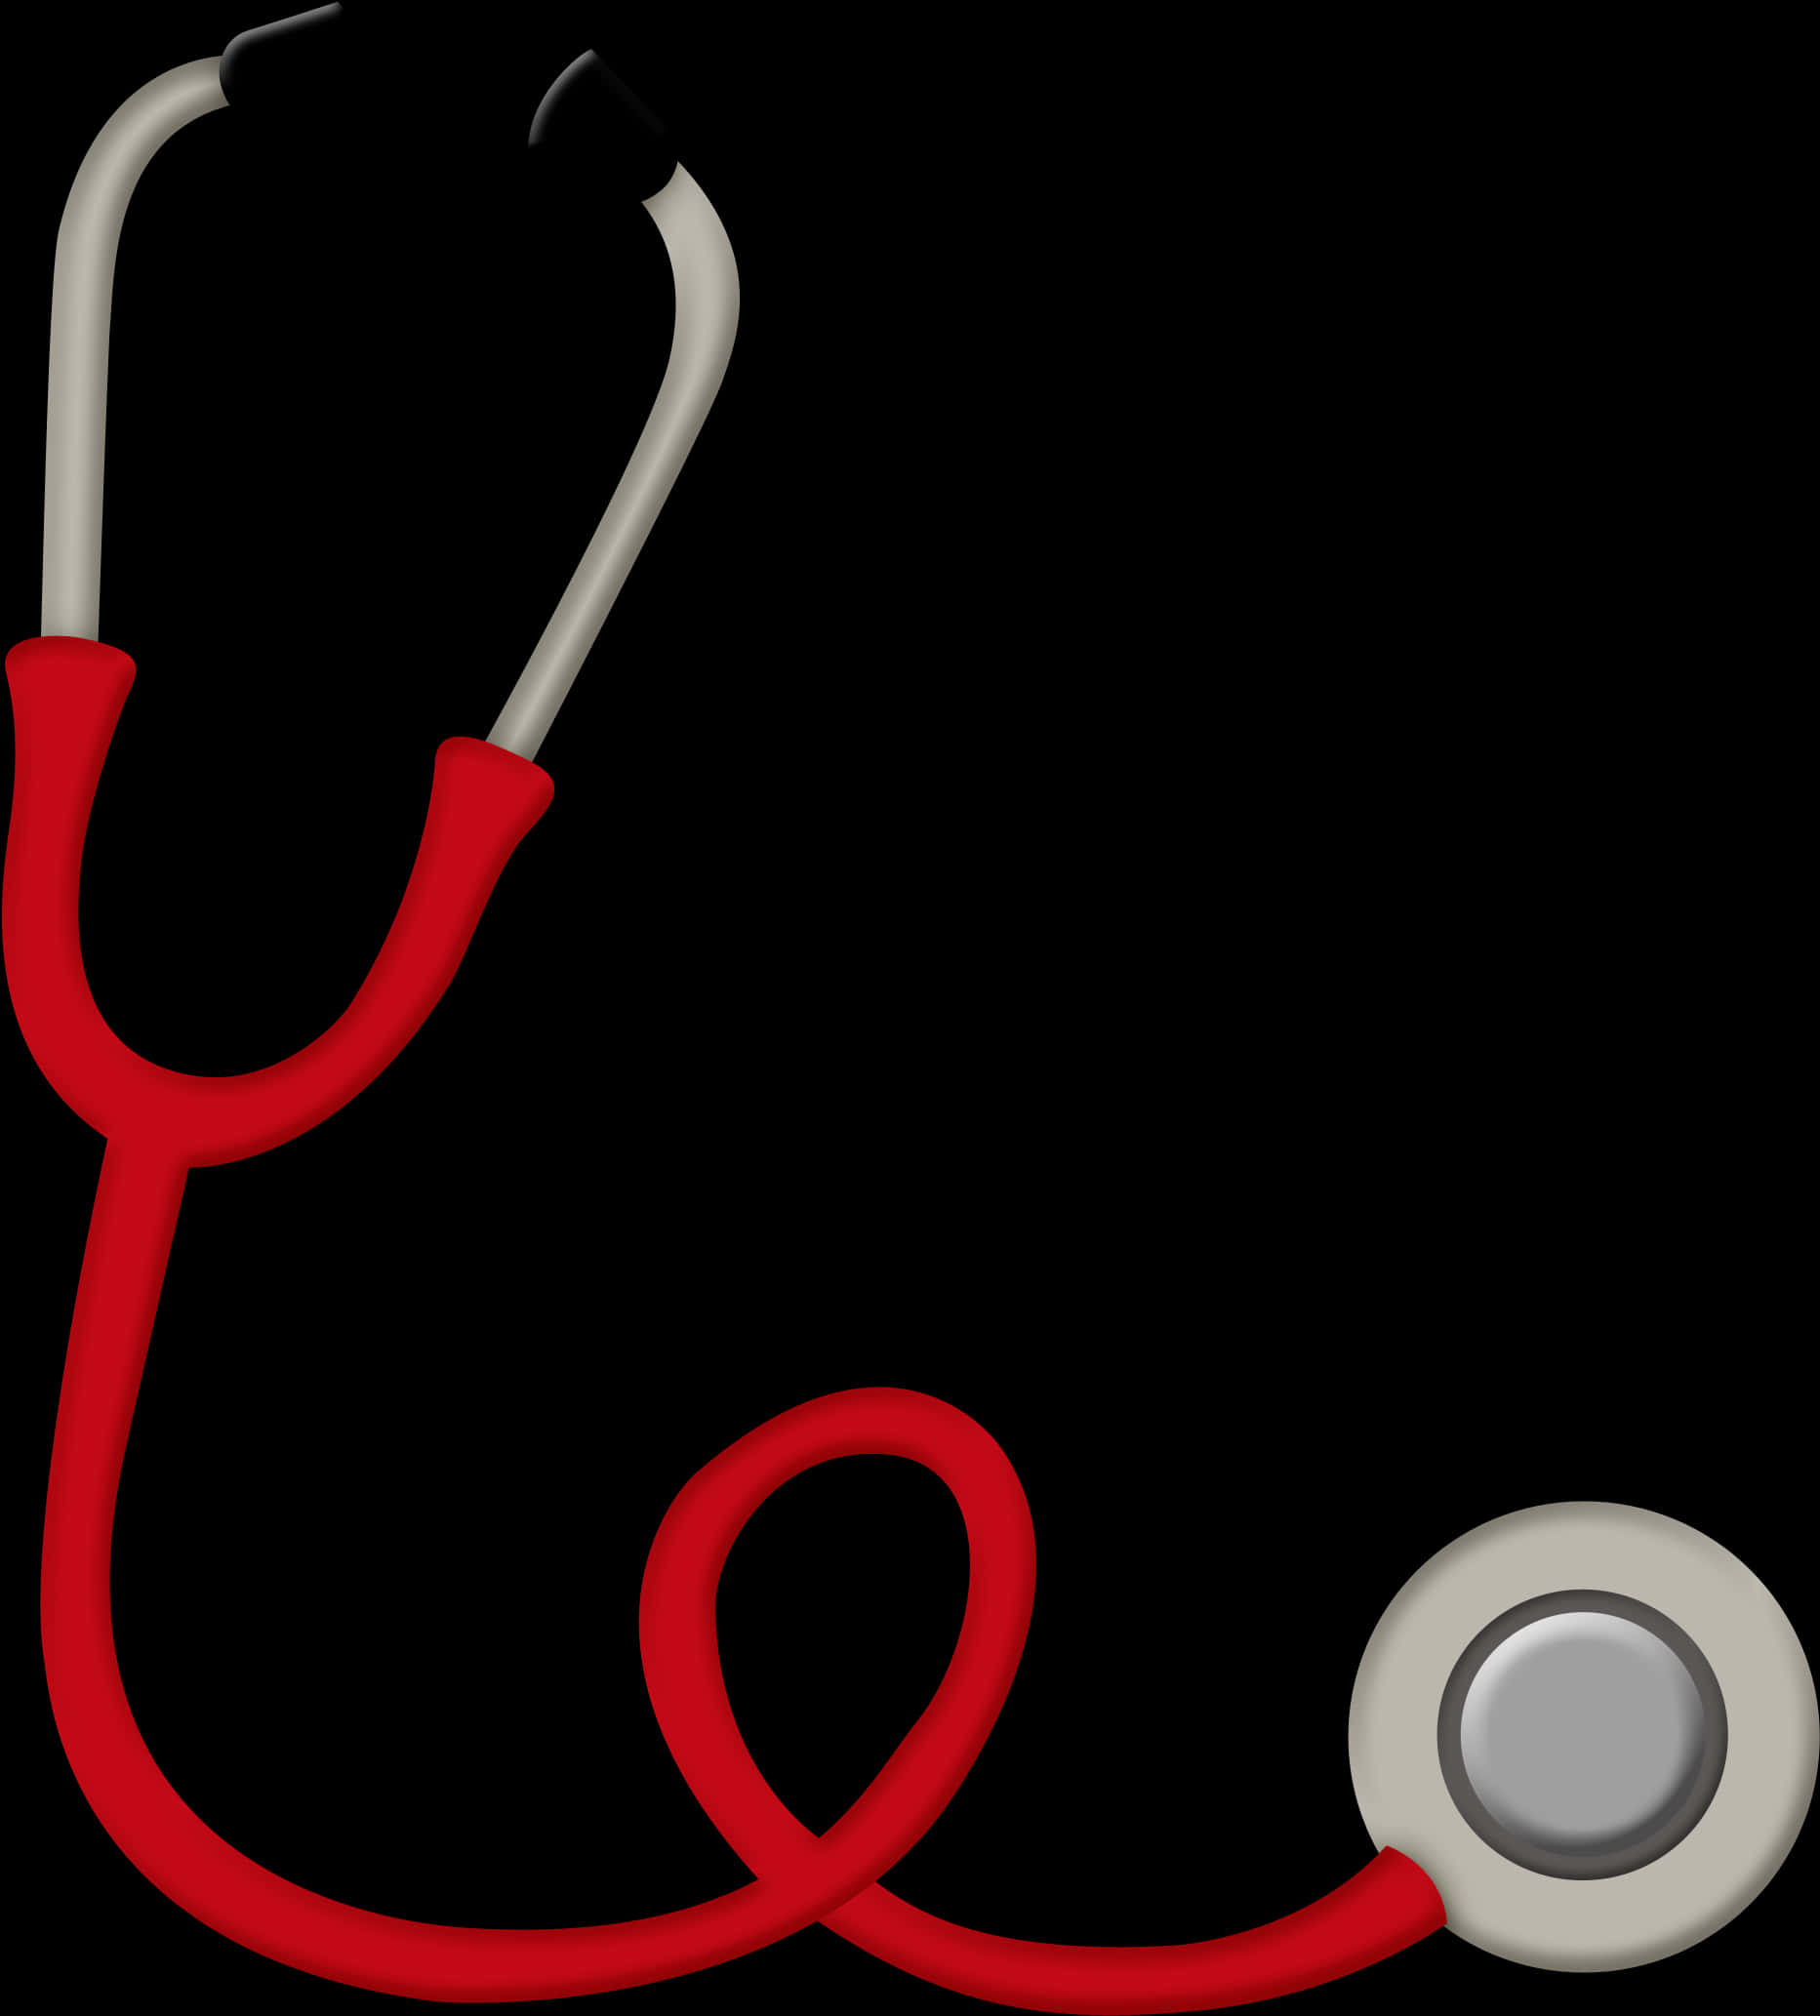 A Stethoscope With A Red Cord